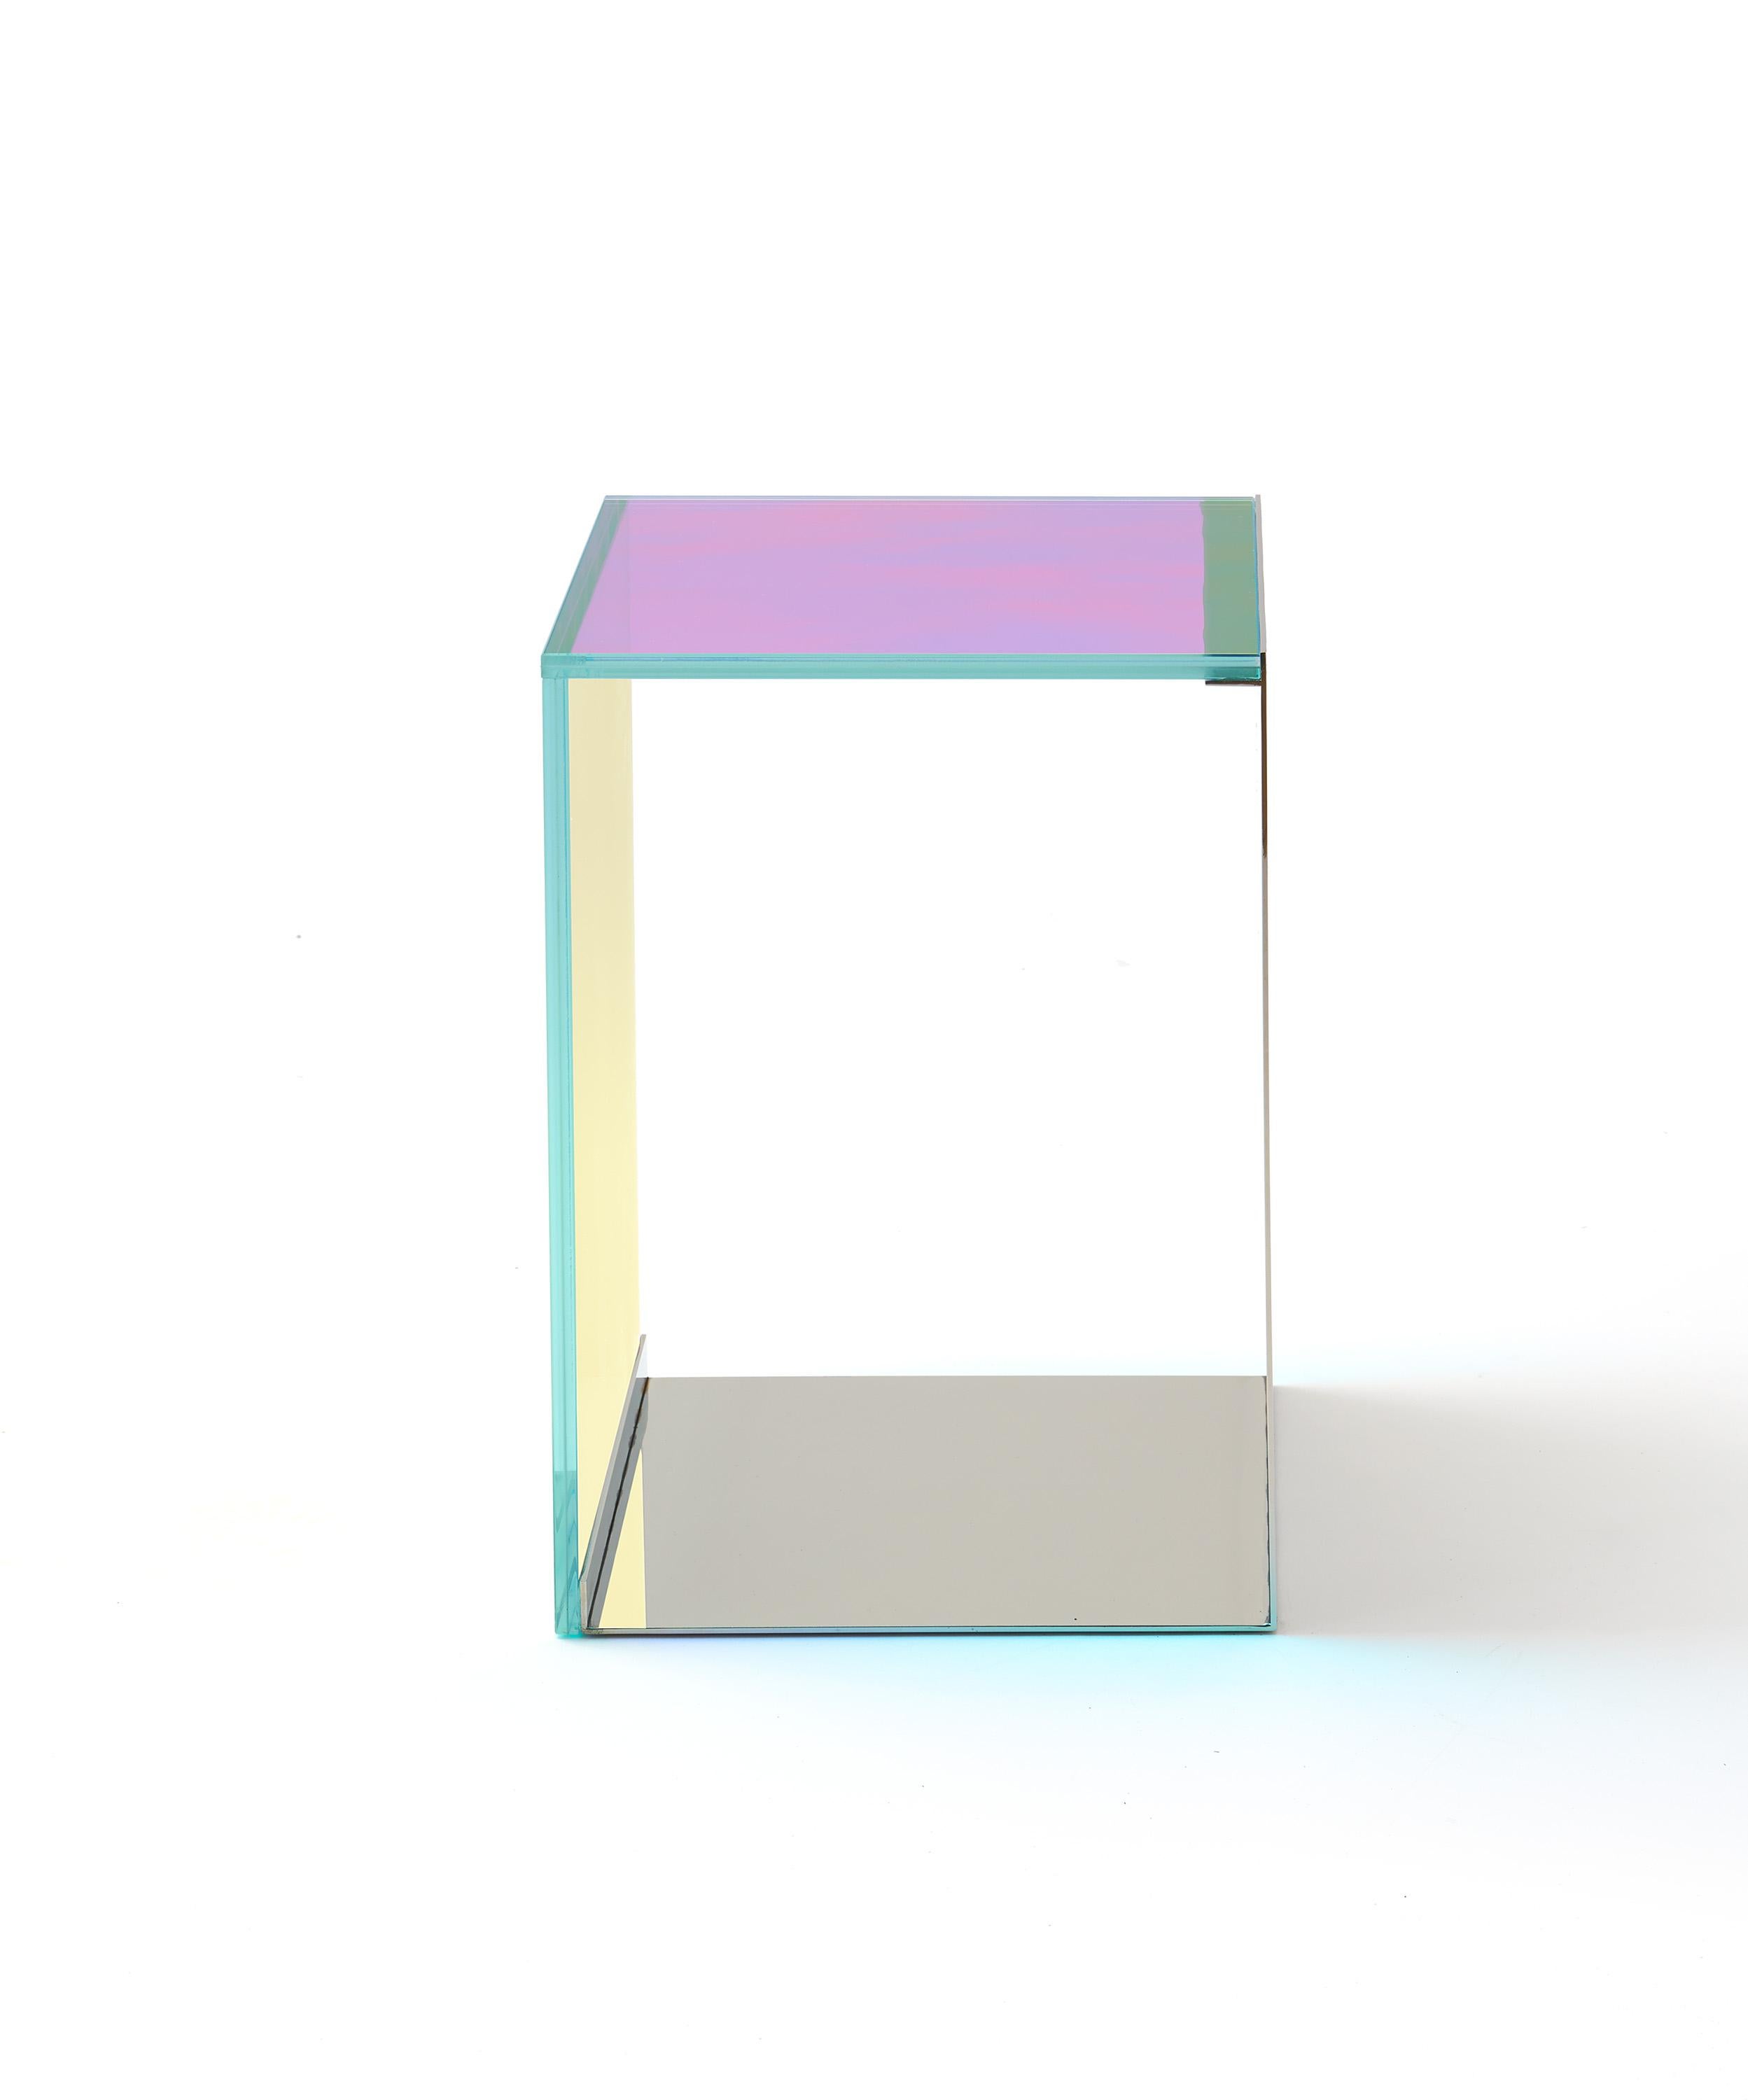 Item No: TA-004

The award-winning Dichroic table is an active statement piece that evolved from Lauren's fascination with early Light and Space artists. As natural light changes throughout the day, the surfaces of the table dramatically shift